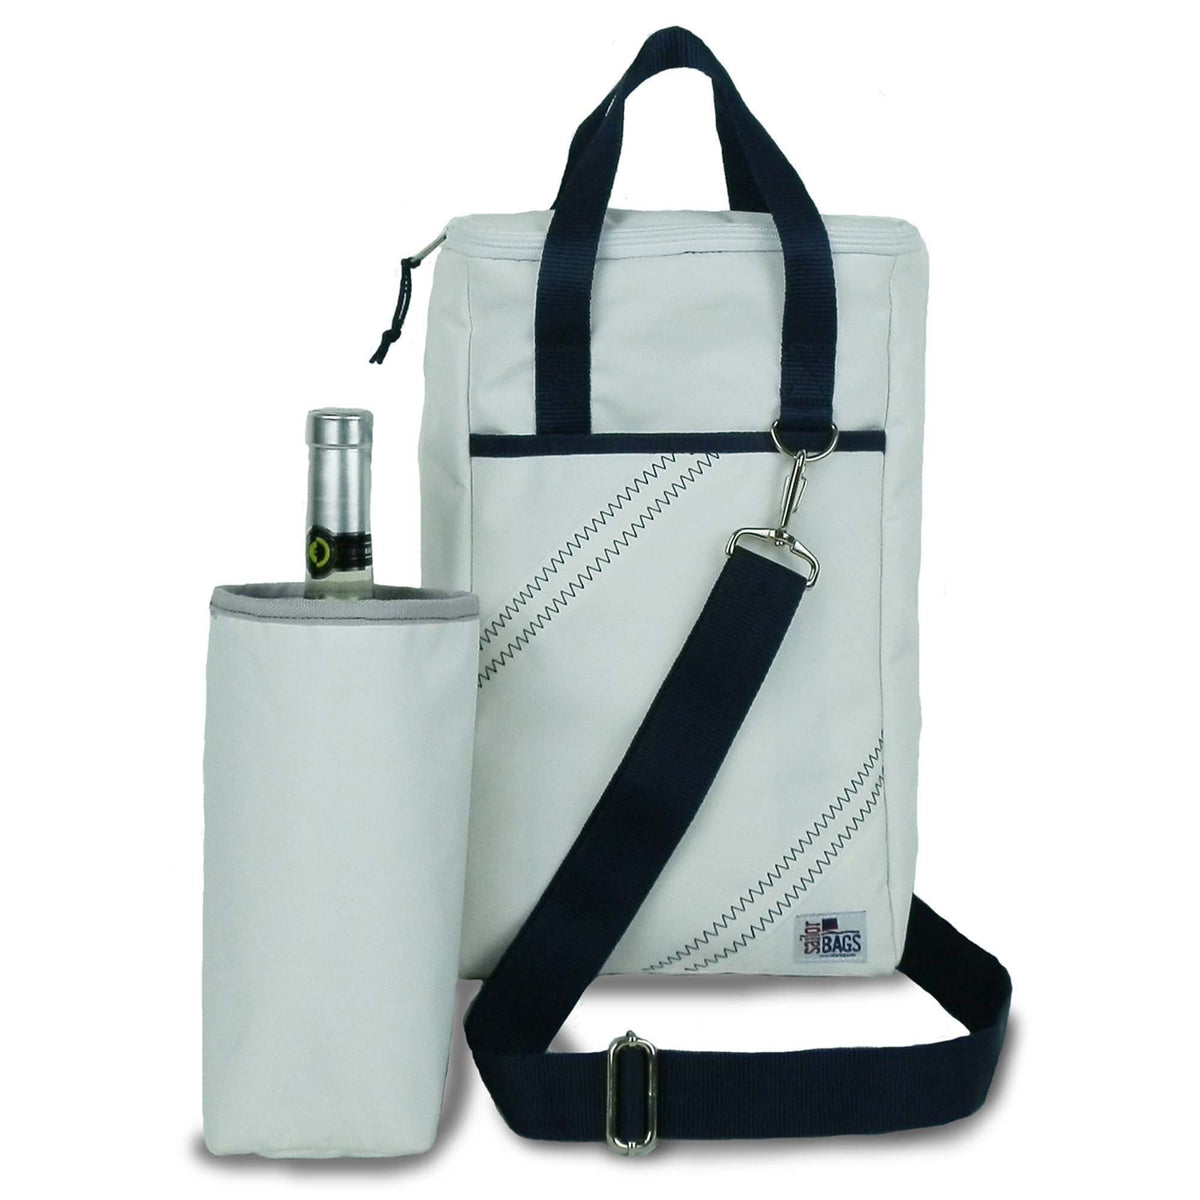 SailorBags Newport Insulated Wine Tote Bag